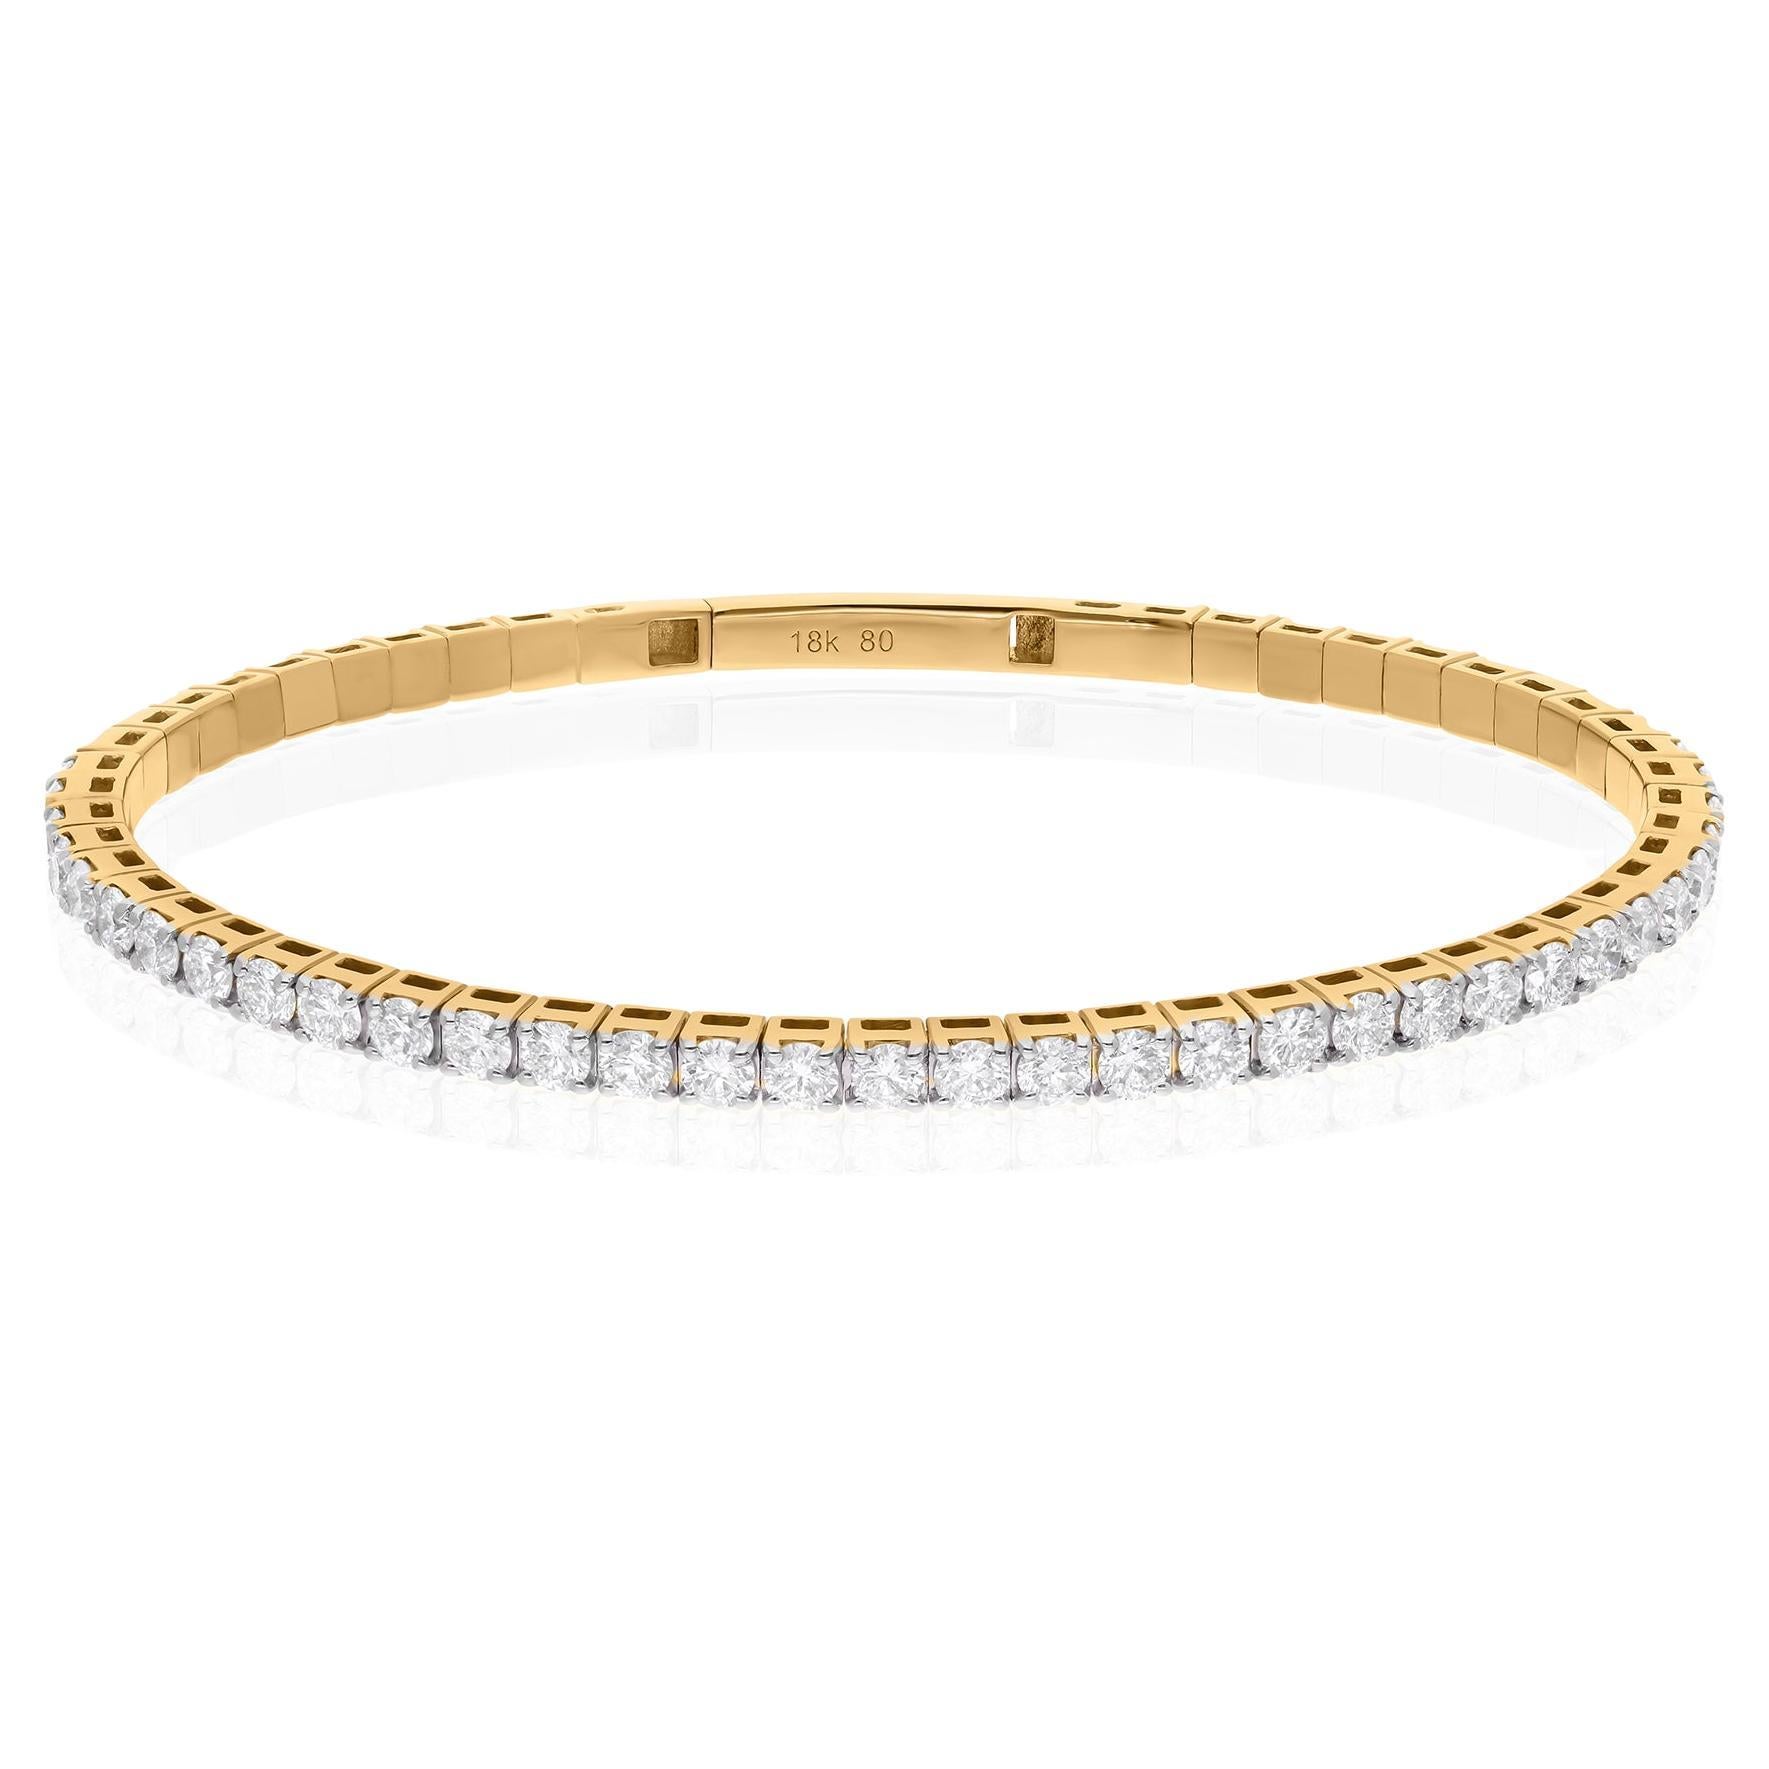 Each diamond featured in this bracelet is hand-selected for its exceptional brilliance and clarity, ensuring a dazzling display of light with every movement. The HI color grade signifies diamonds of near-colorless beauty, radiating a subtle warmth